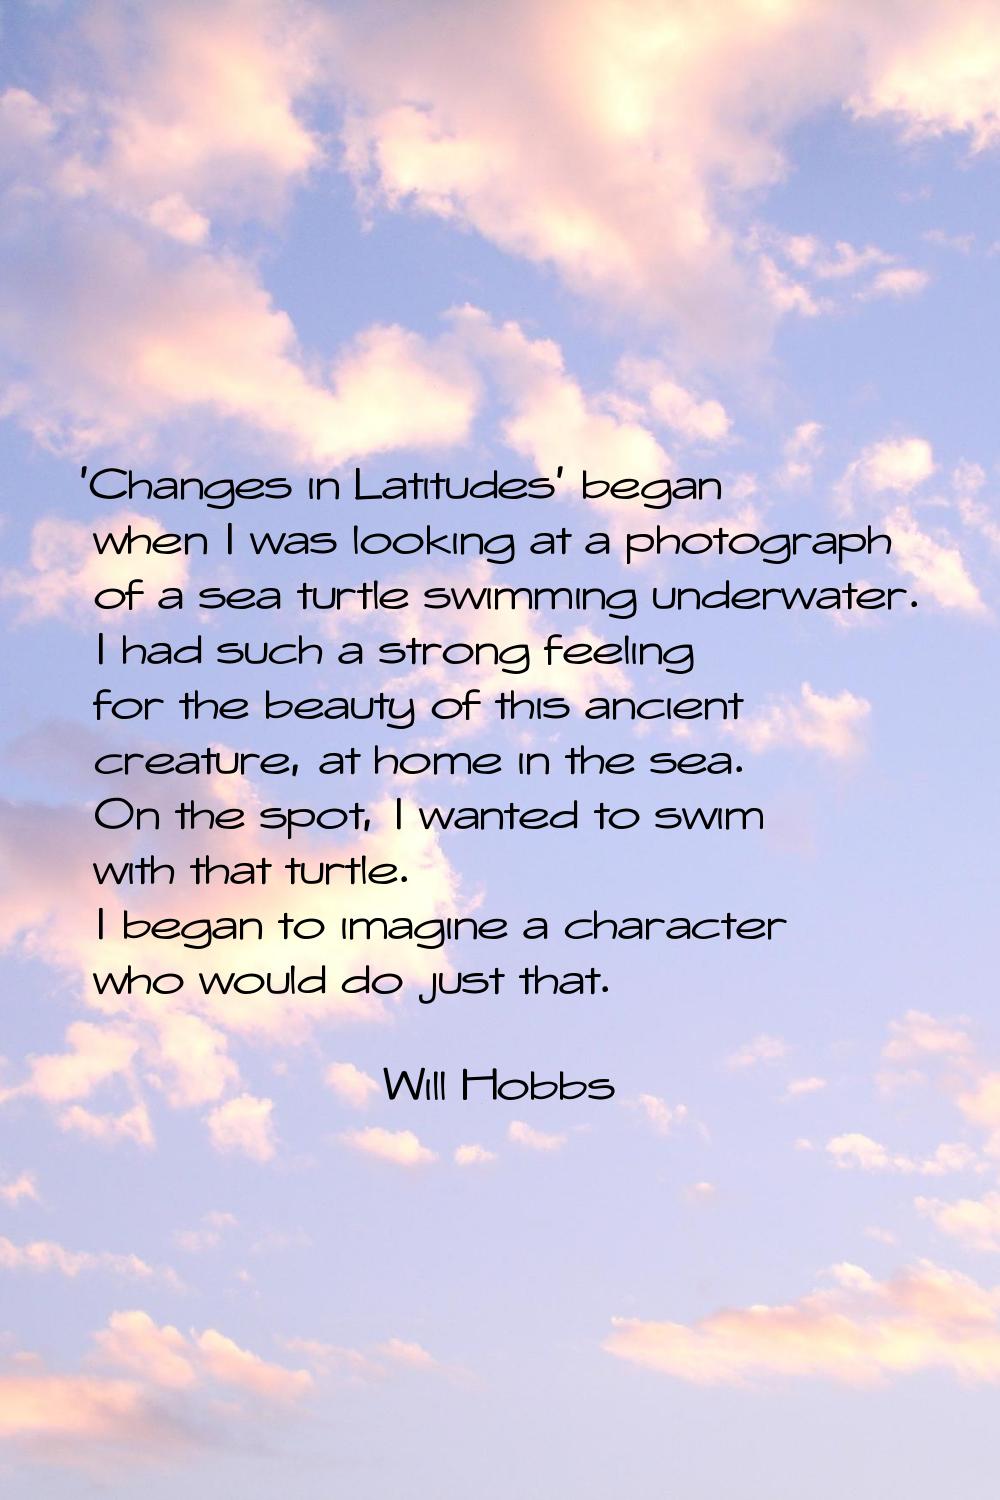 'Changes in Latitudes' began when I was looking at a photograph of a sea turtle swimming underwater